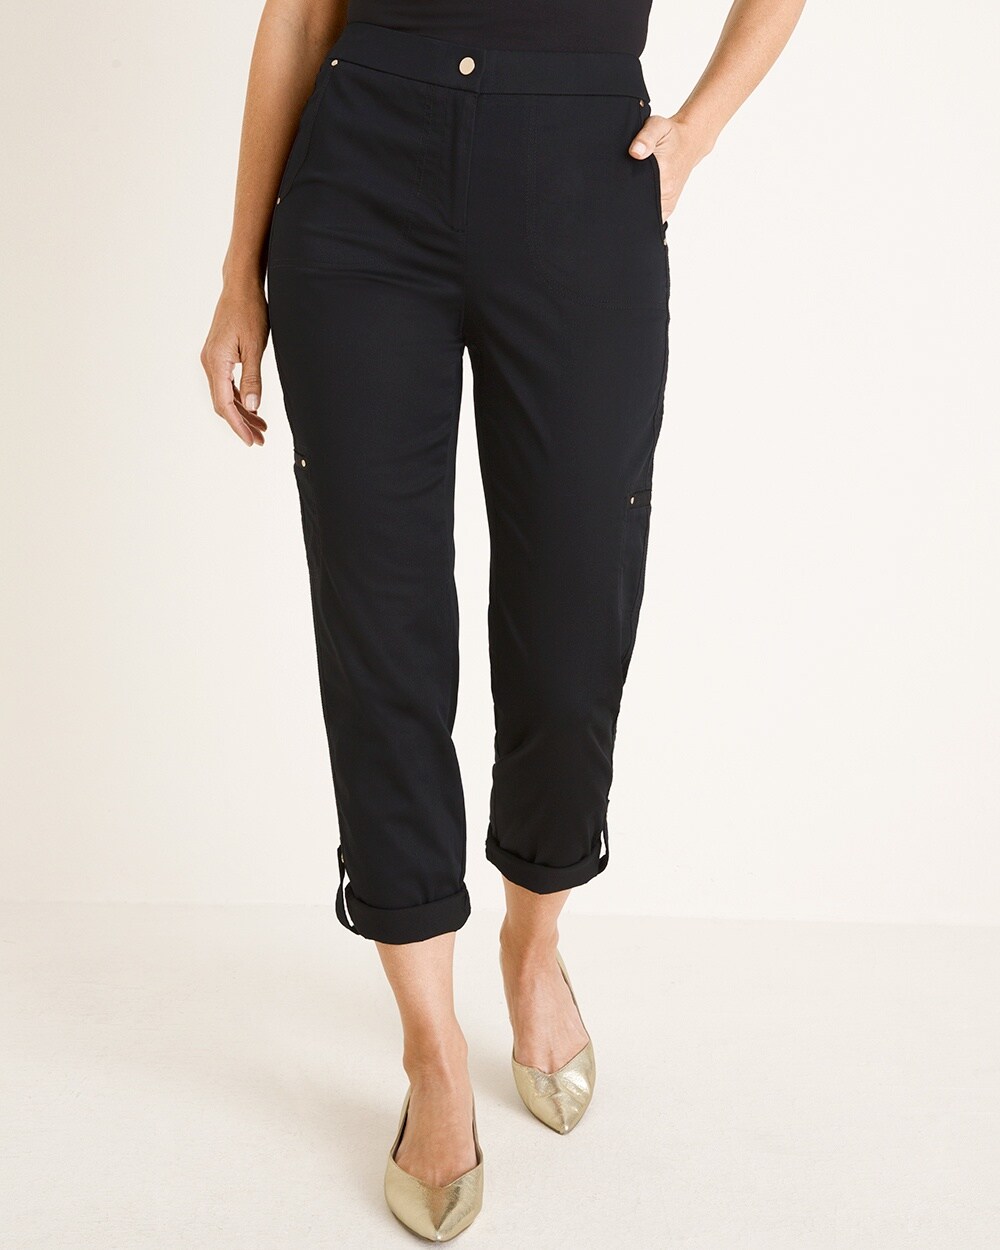 Secret Stretch Luxe Utility Convertible Crop to Ankle Pants - Chico's